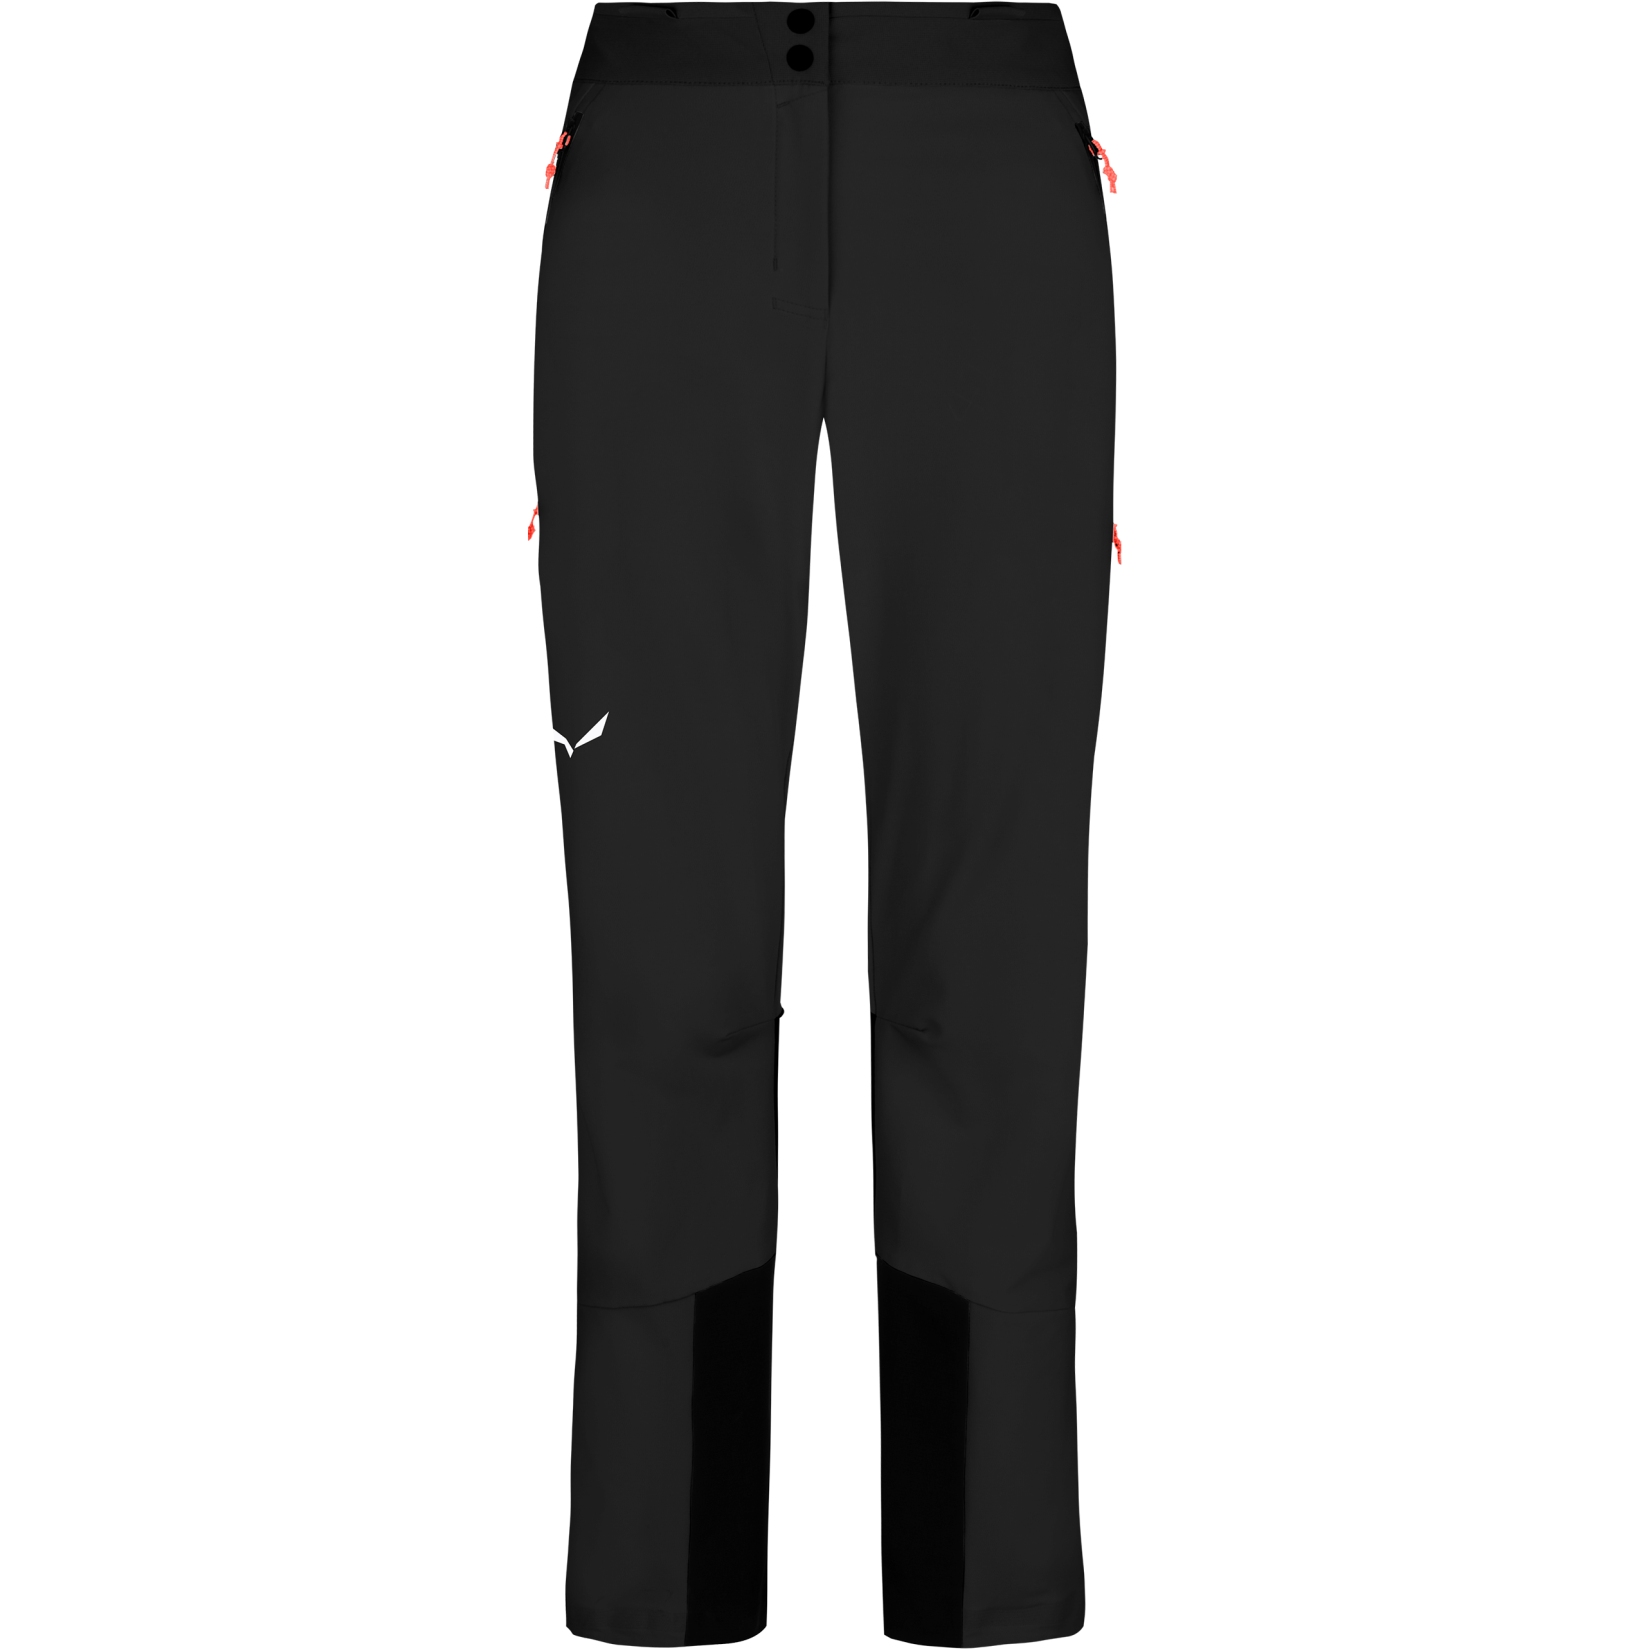 Picture of Salewa Sella Durastretch Pants Women - black out 910